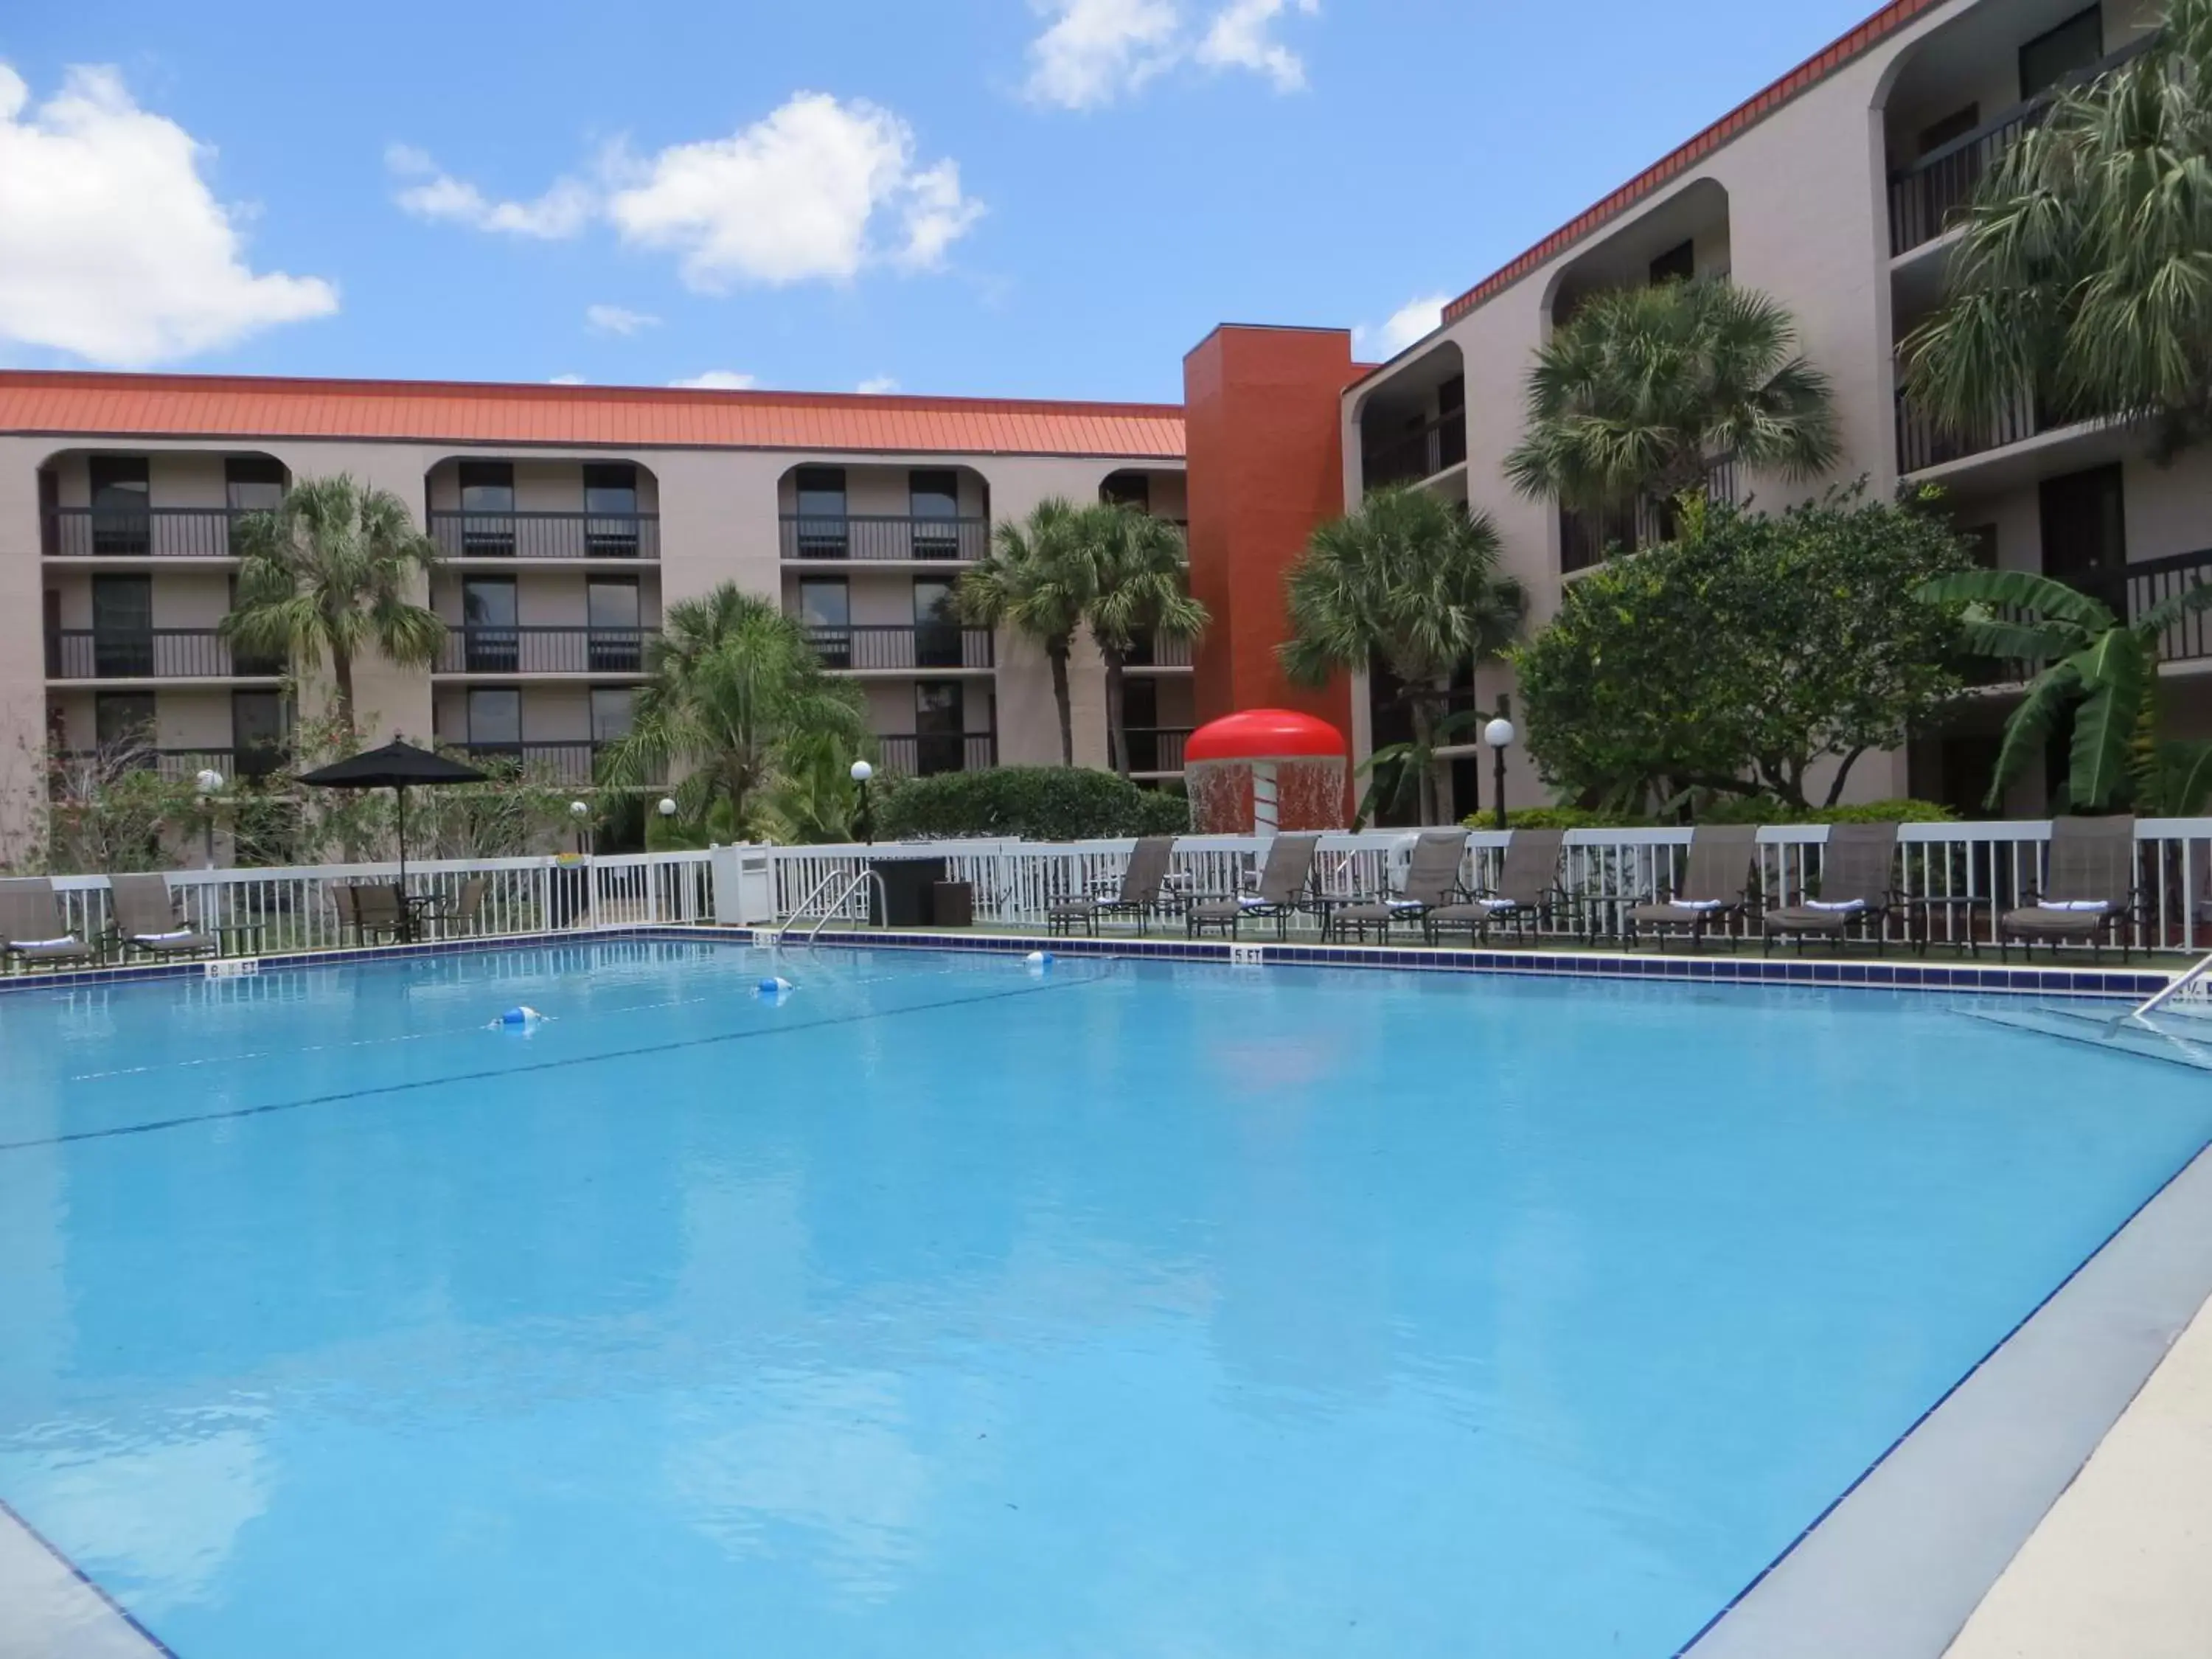 Swimming pool, Property Building in Grand Hotel Orlando at Universal Blvd